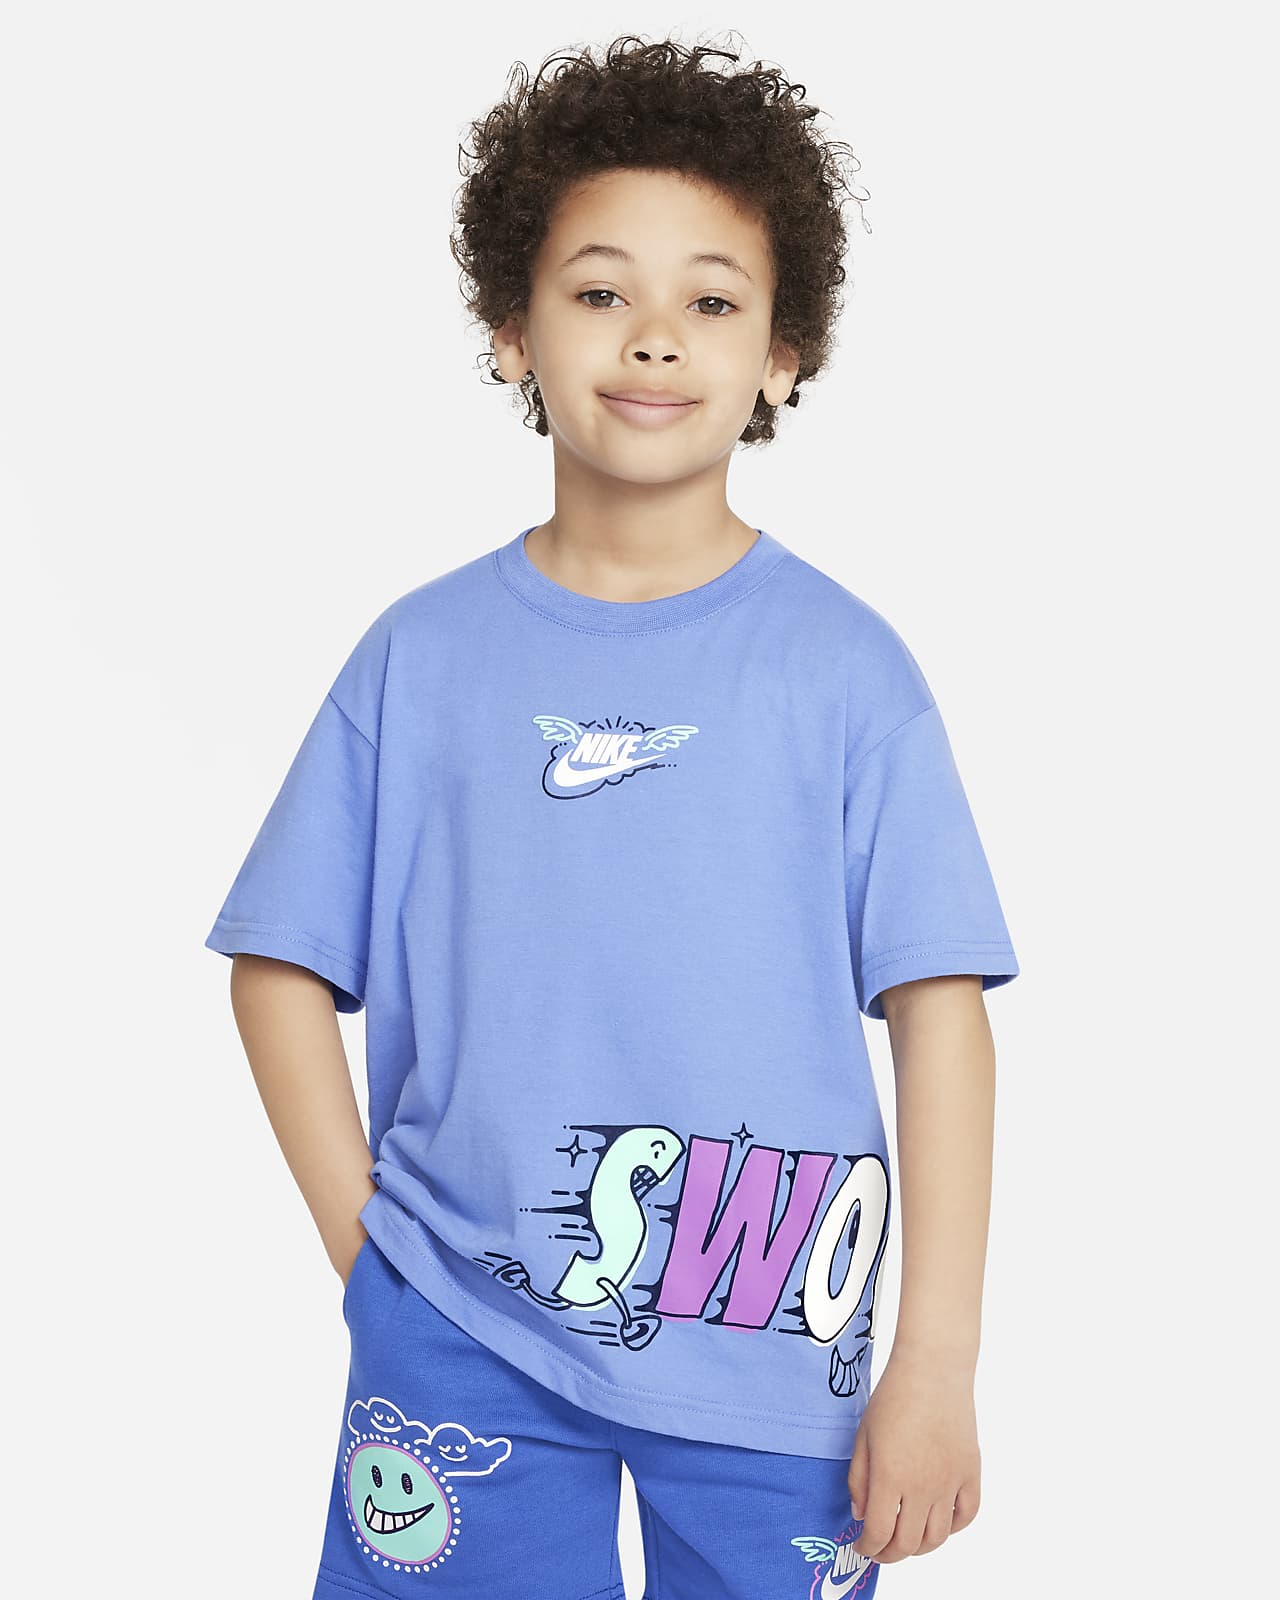 https://static.nike.com/a/images/t_PDP_1280_v1/f_auto,q_auto:eco/2360a400-0bec-456b-860d-75d6519c3fe9/t-shirt-sportswear-art-of-play-relaxed-graphic-tee-pour-BPC7Zs.png